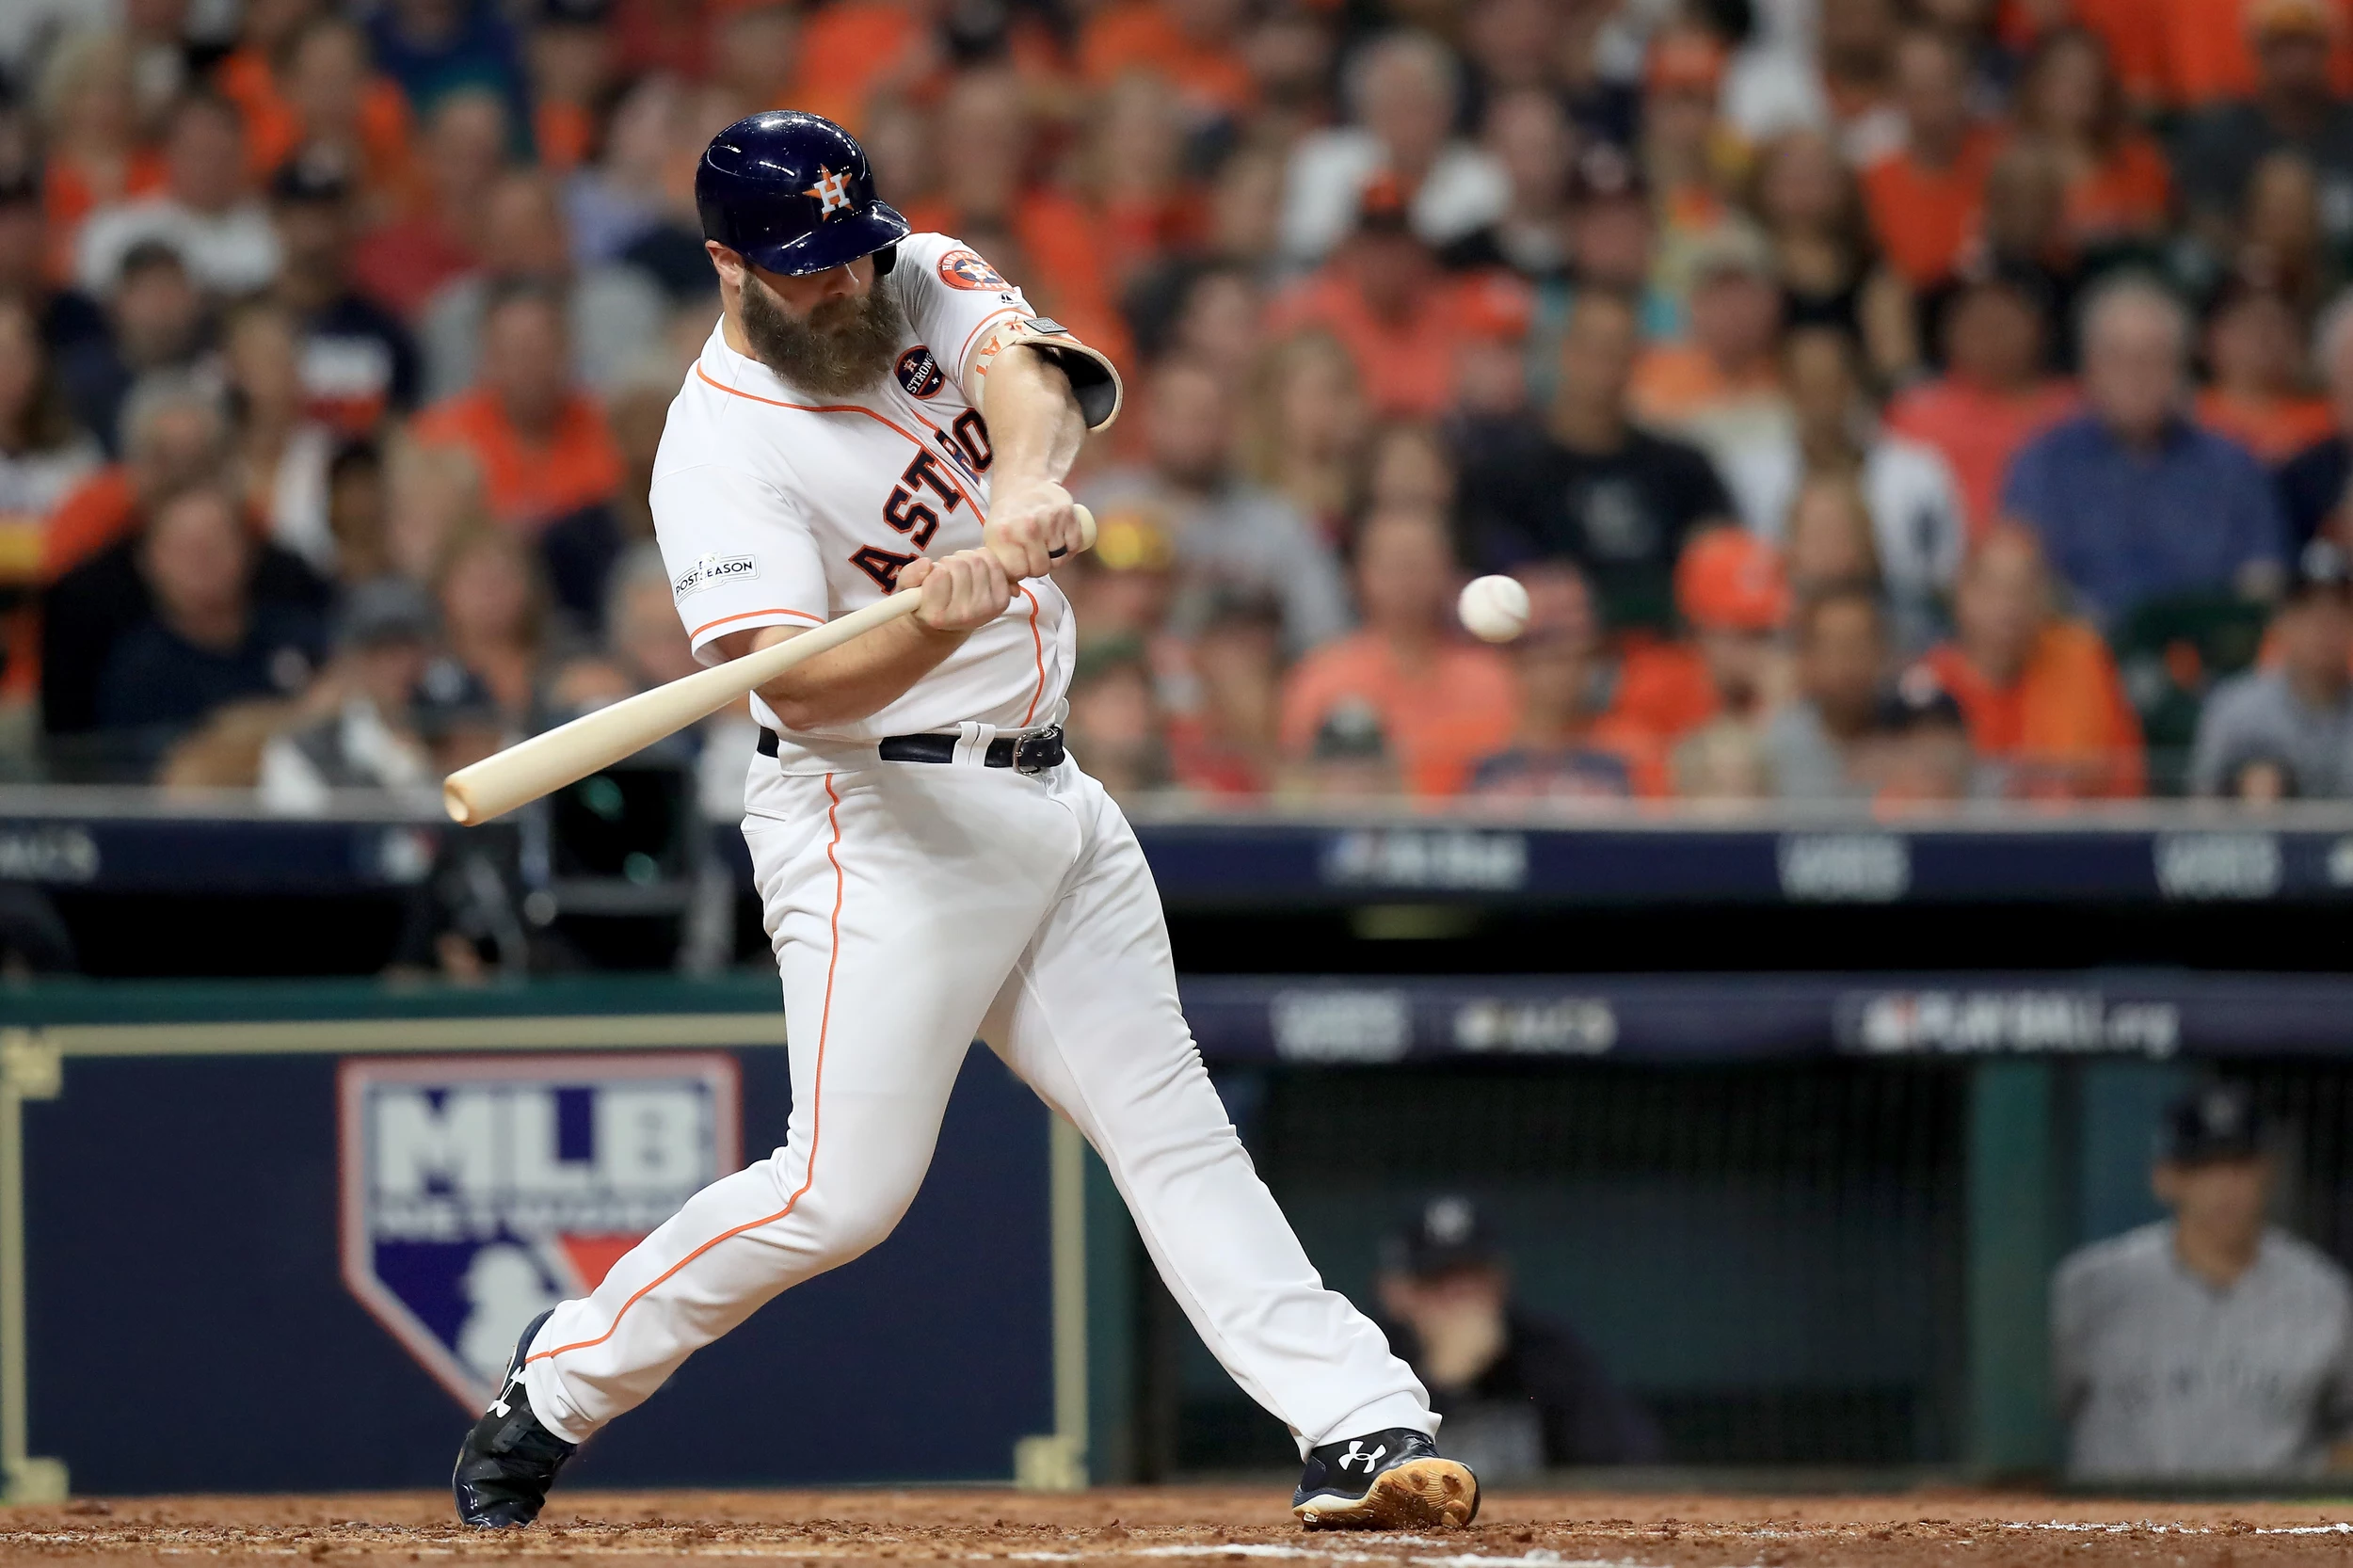 The search for Evan Gattis -- TELLING THE STORY